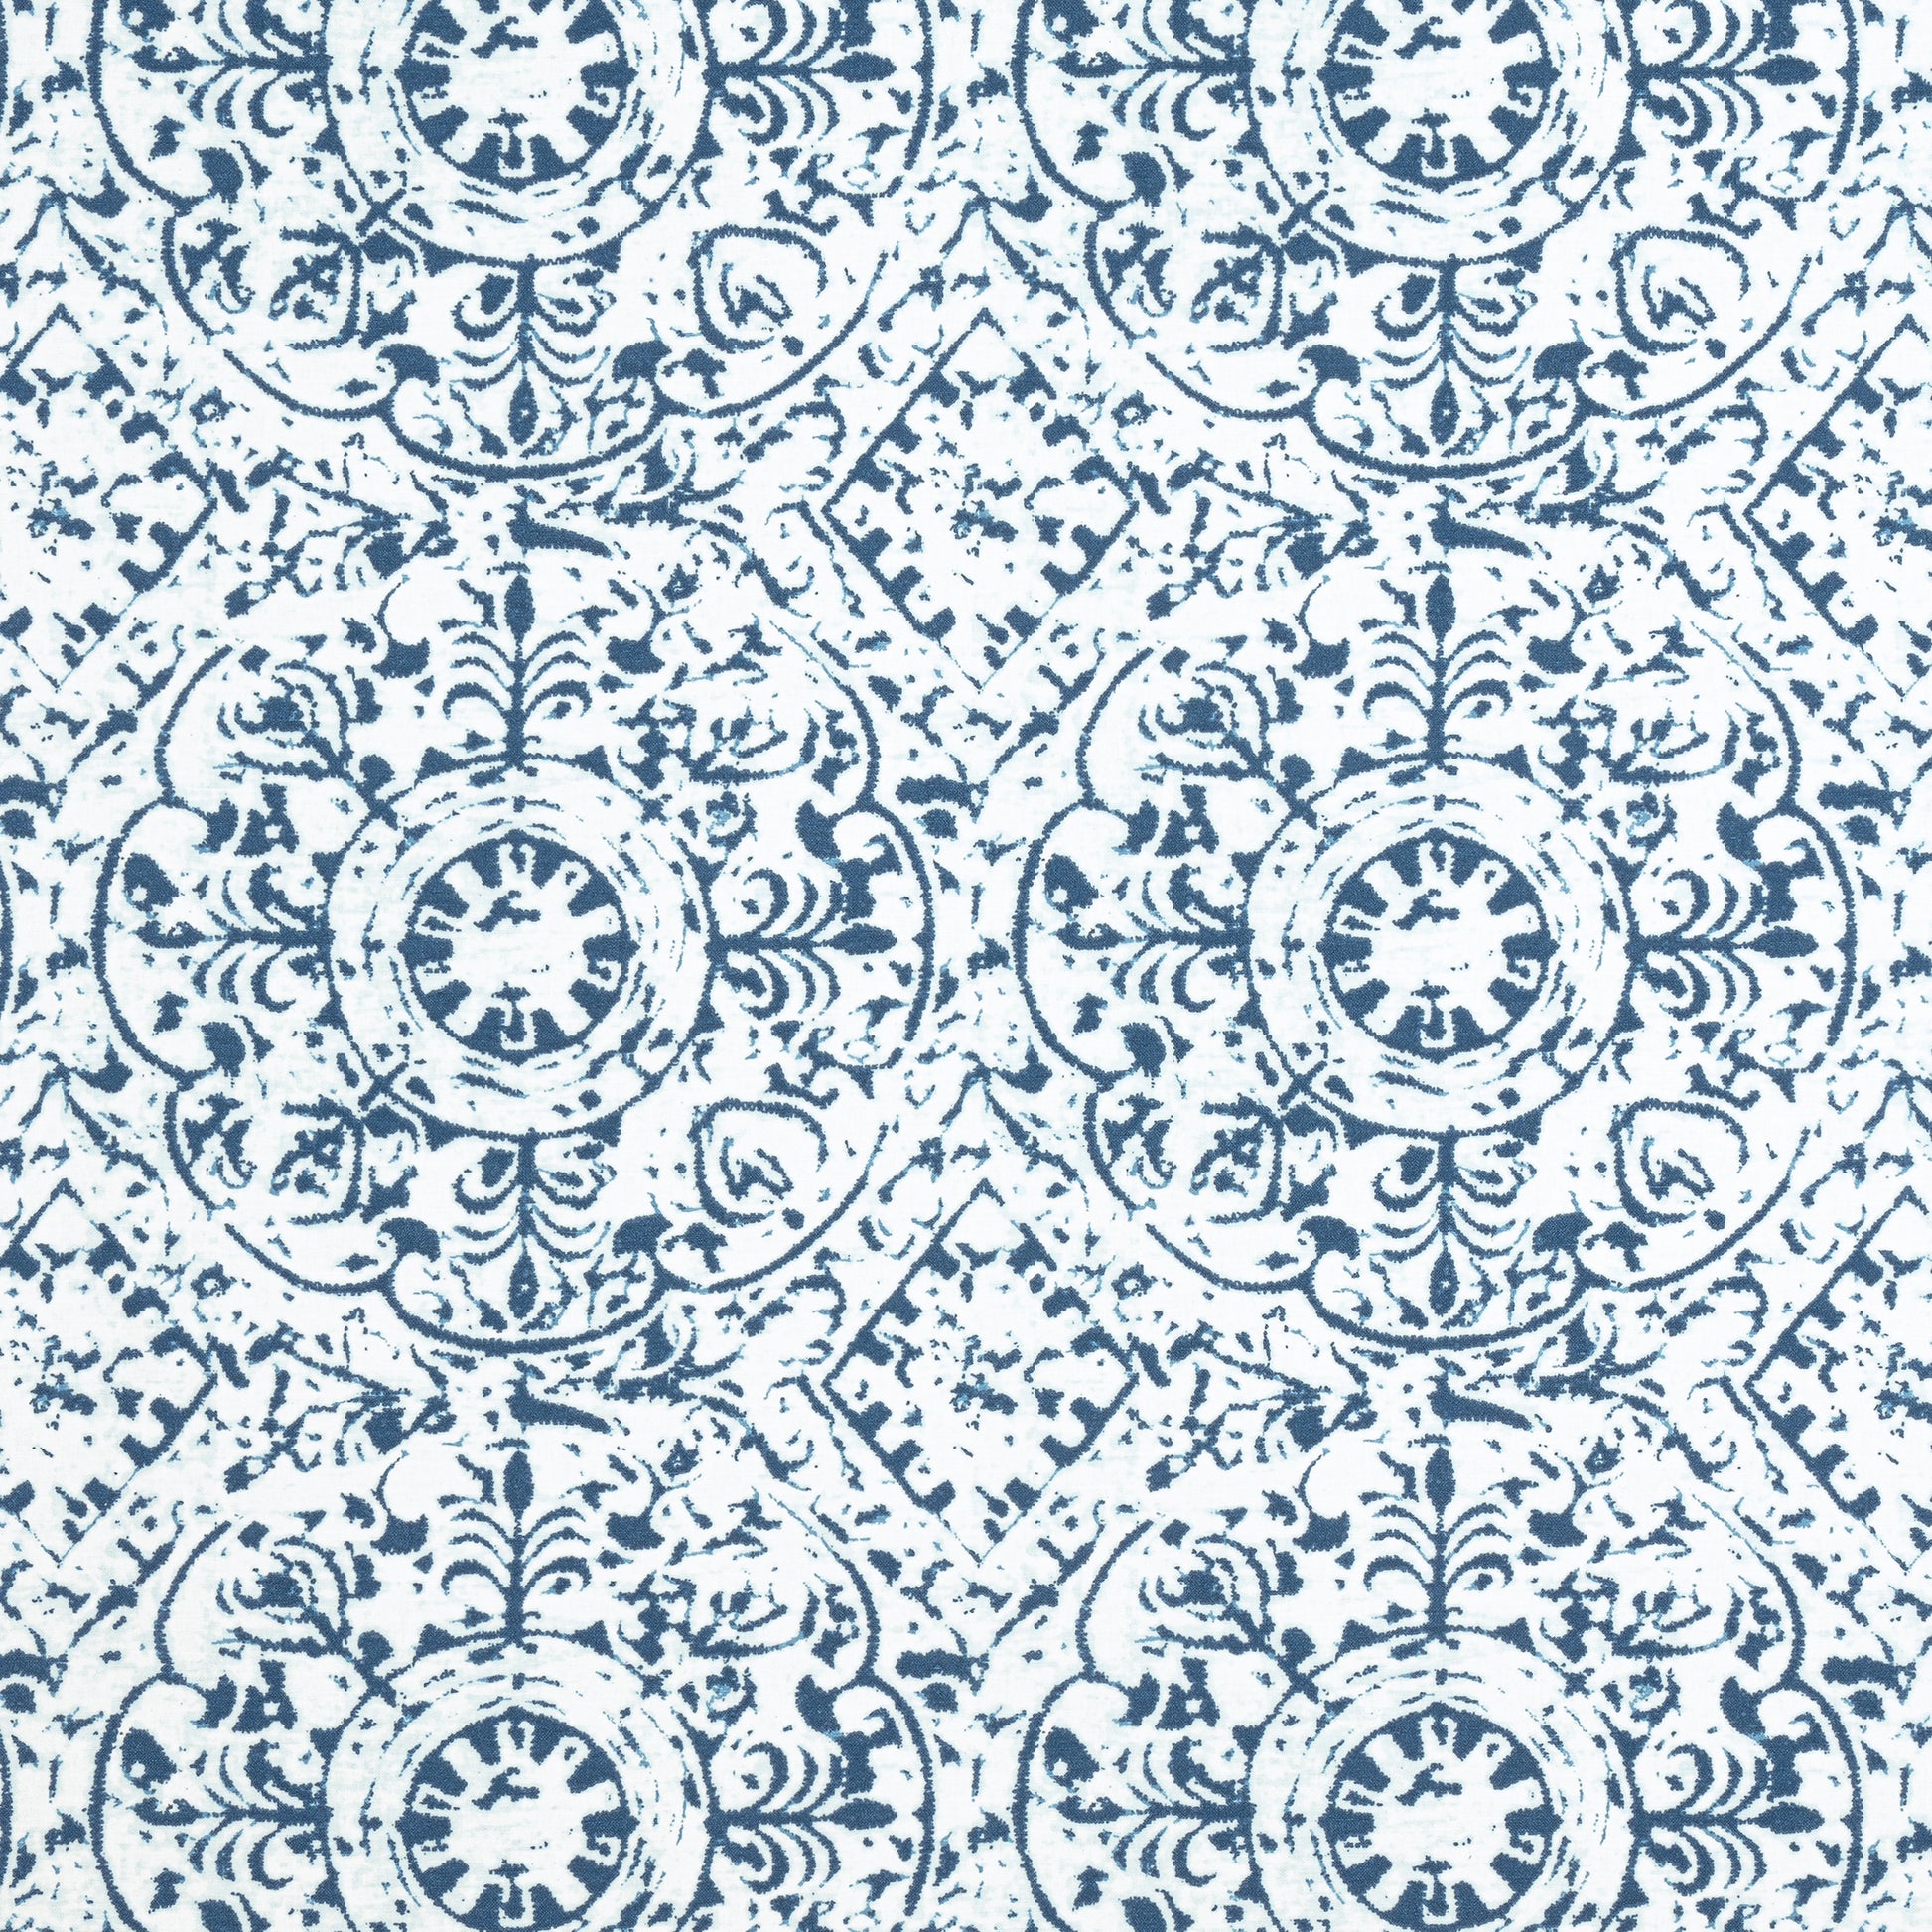 Purchase Thibaut Fabric Product F981312 pattern name Havana color Navy